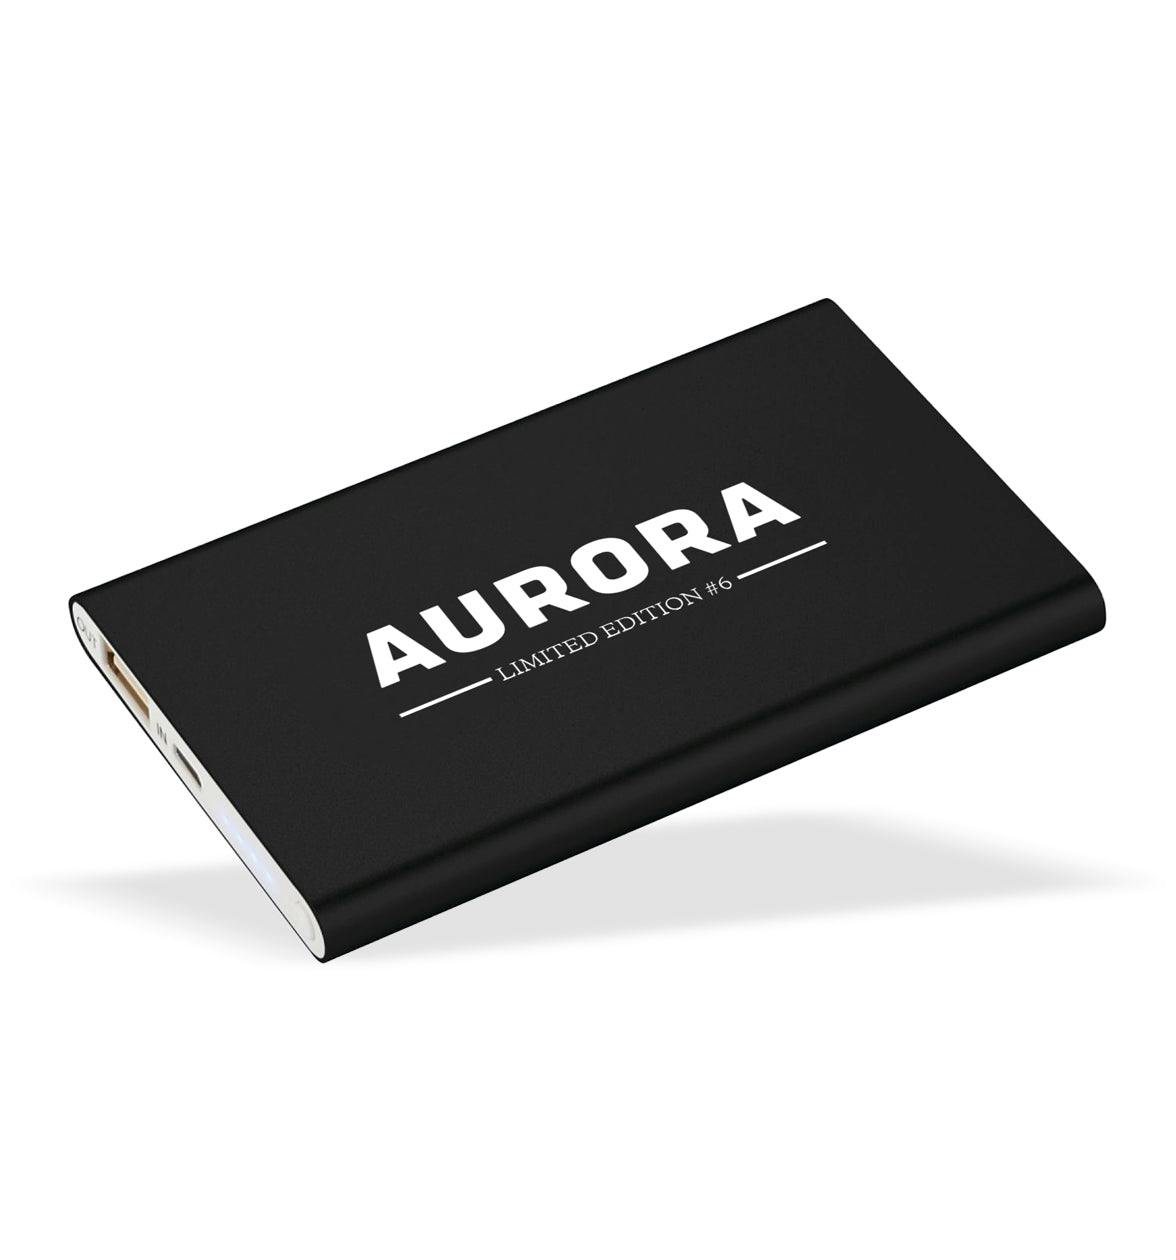 Collector Item #6 – Limited Edition Aurora Power Bank - $0